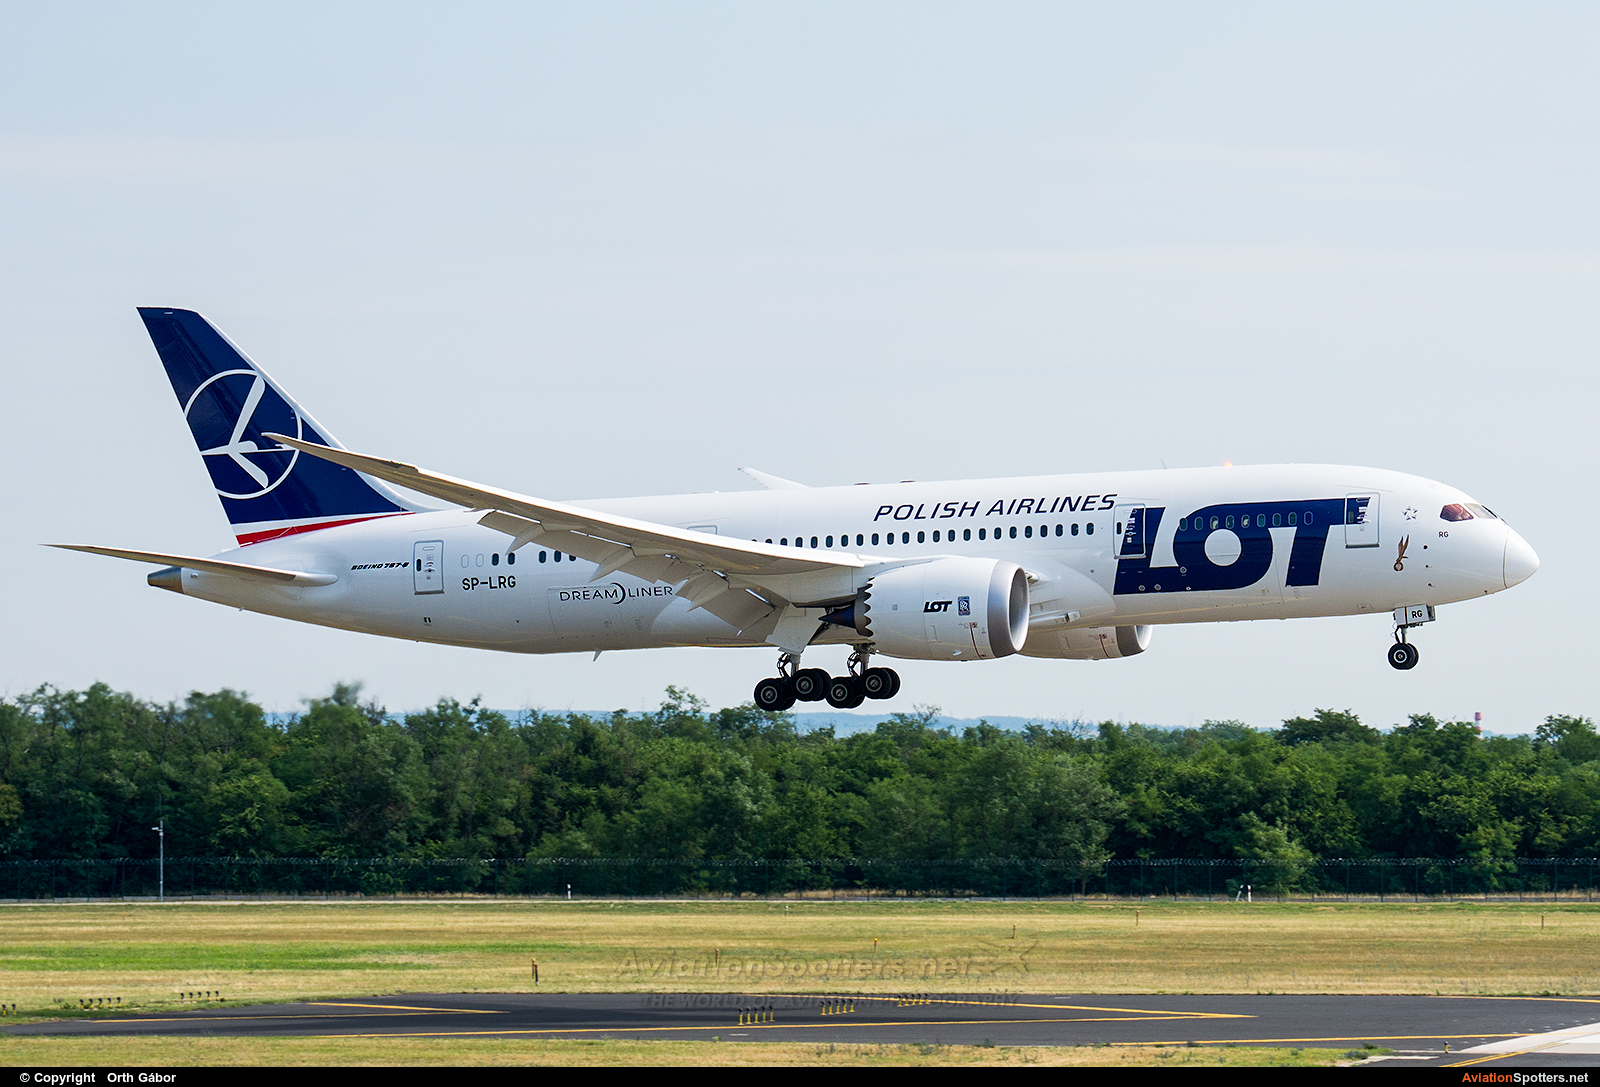 LOT - Polish Airlines  -  787-8 Dreamliner  (SP-LRG) By Orth Gábor (Roodkop)